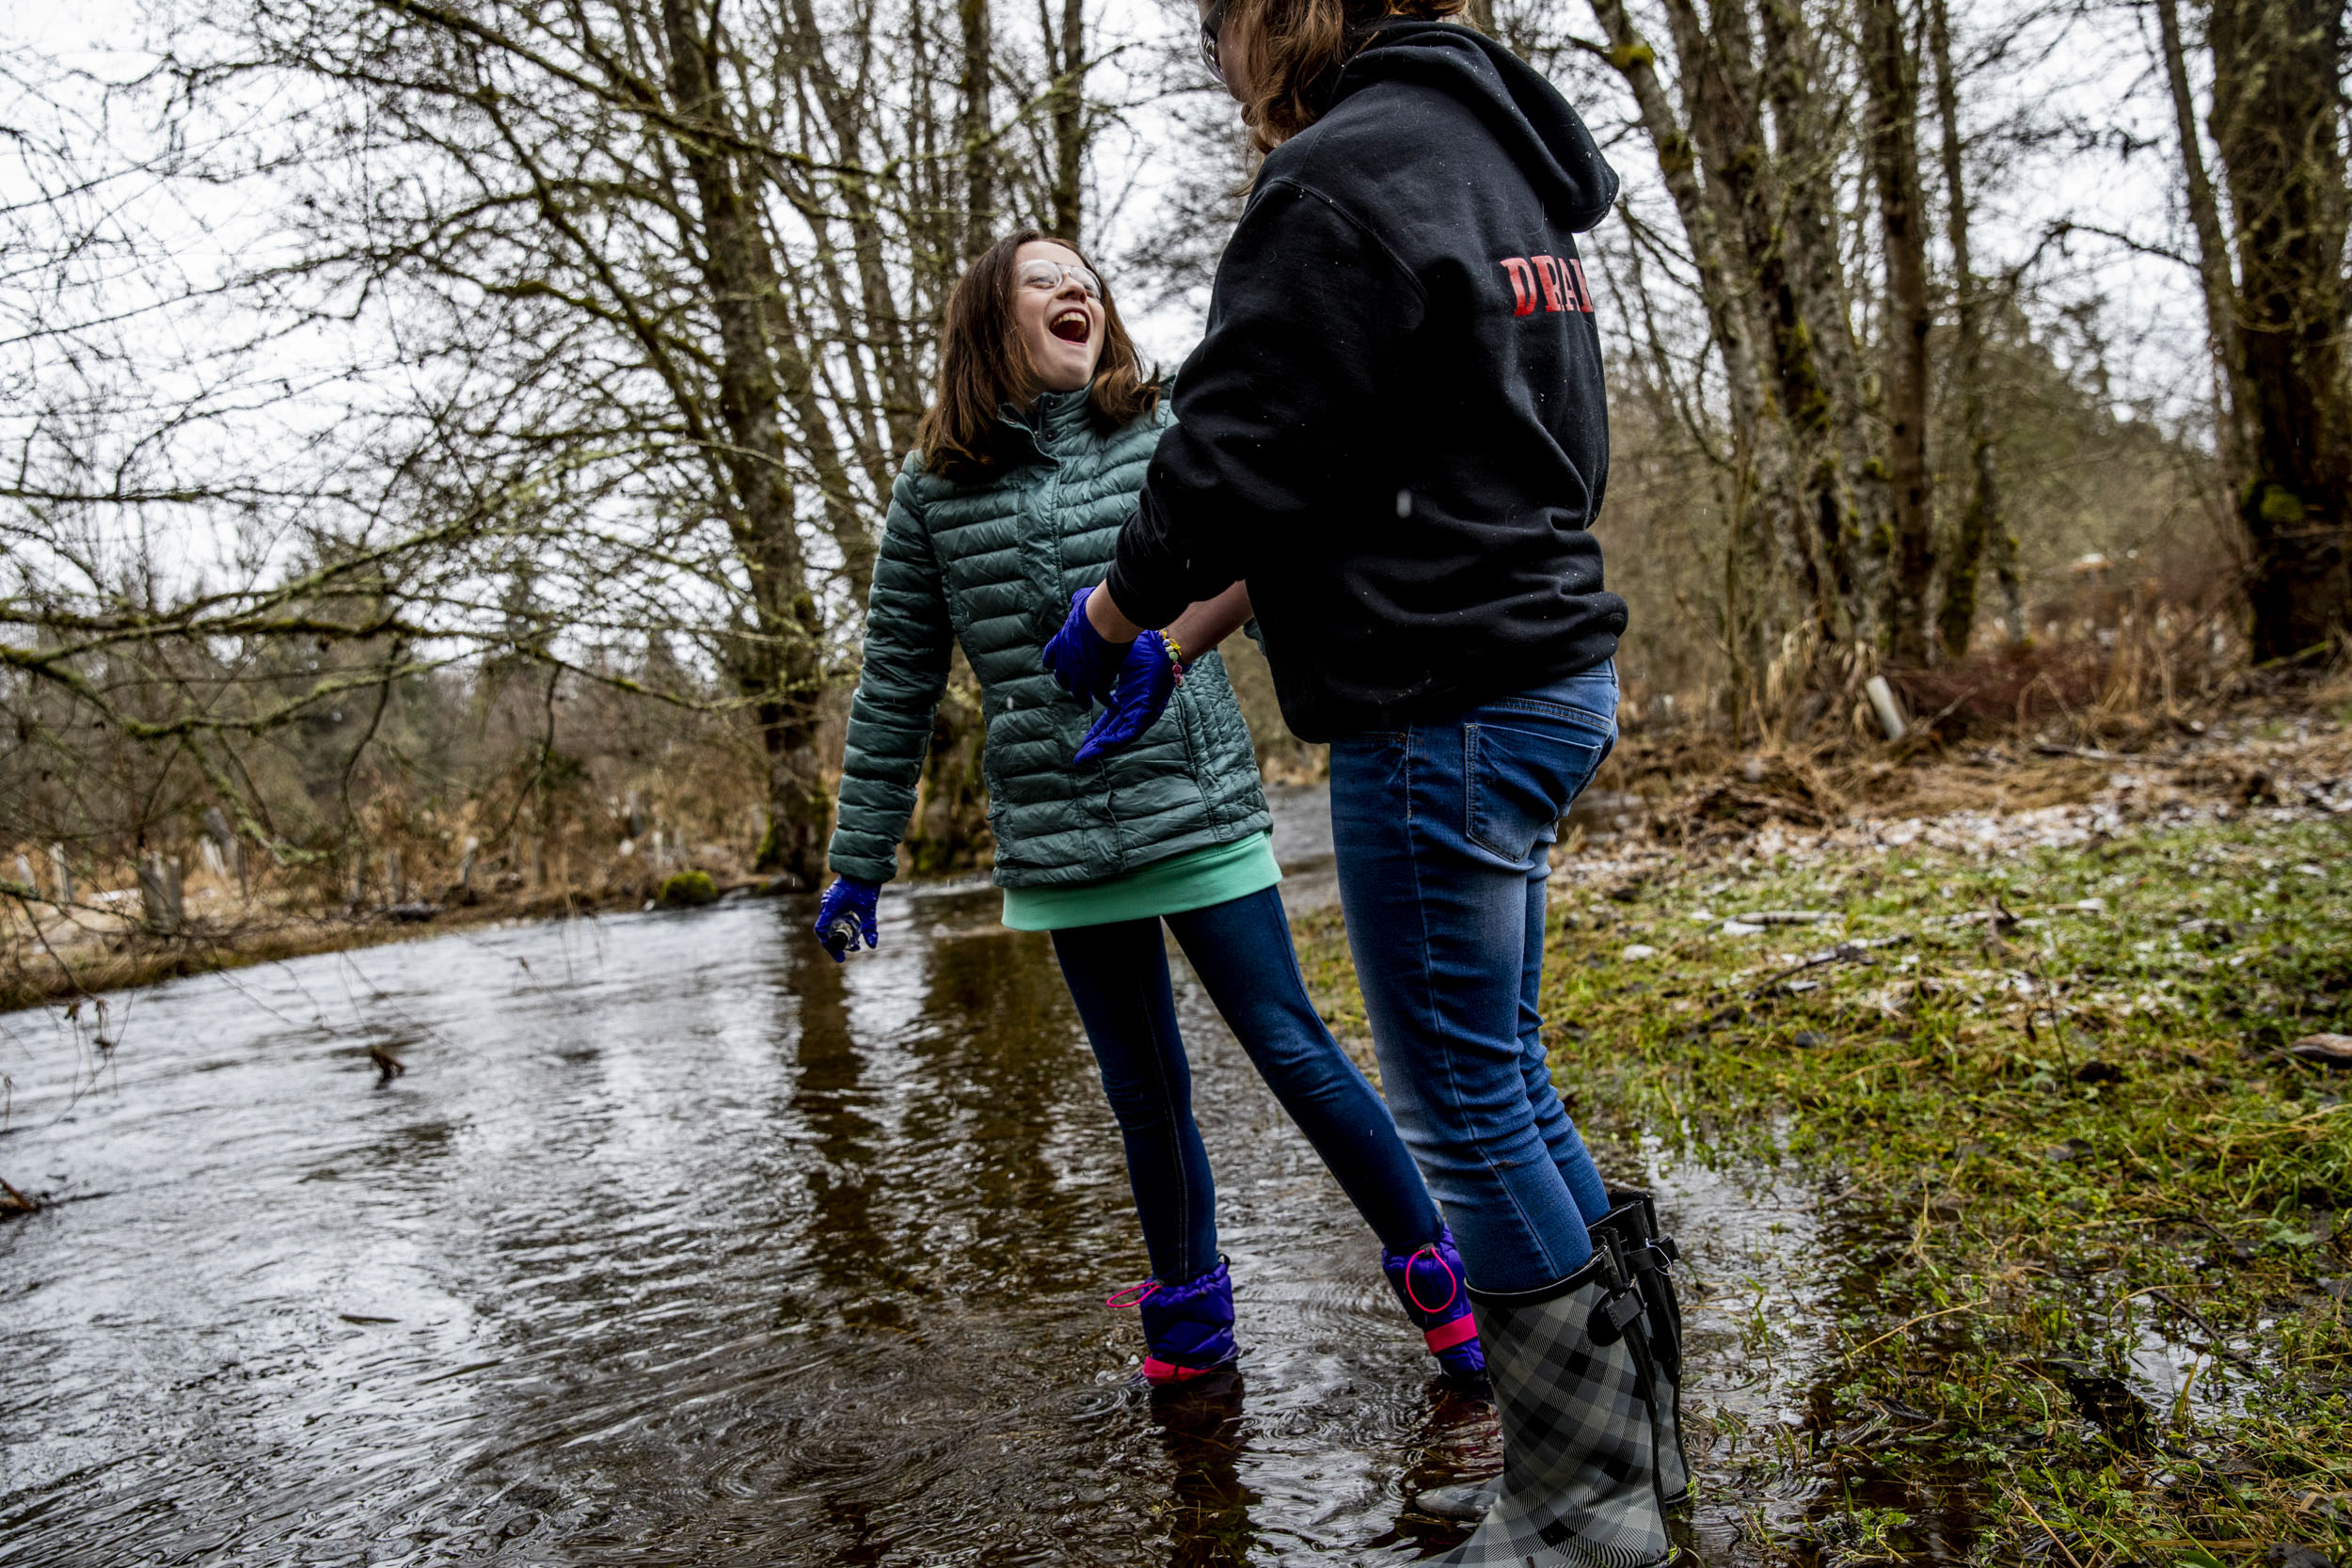 Sixth graders Taylor Drake, right, and Lexi Thompson collect water samples from Muck Creek.